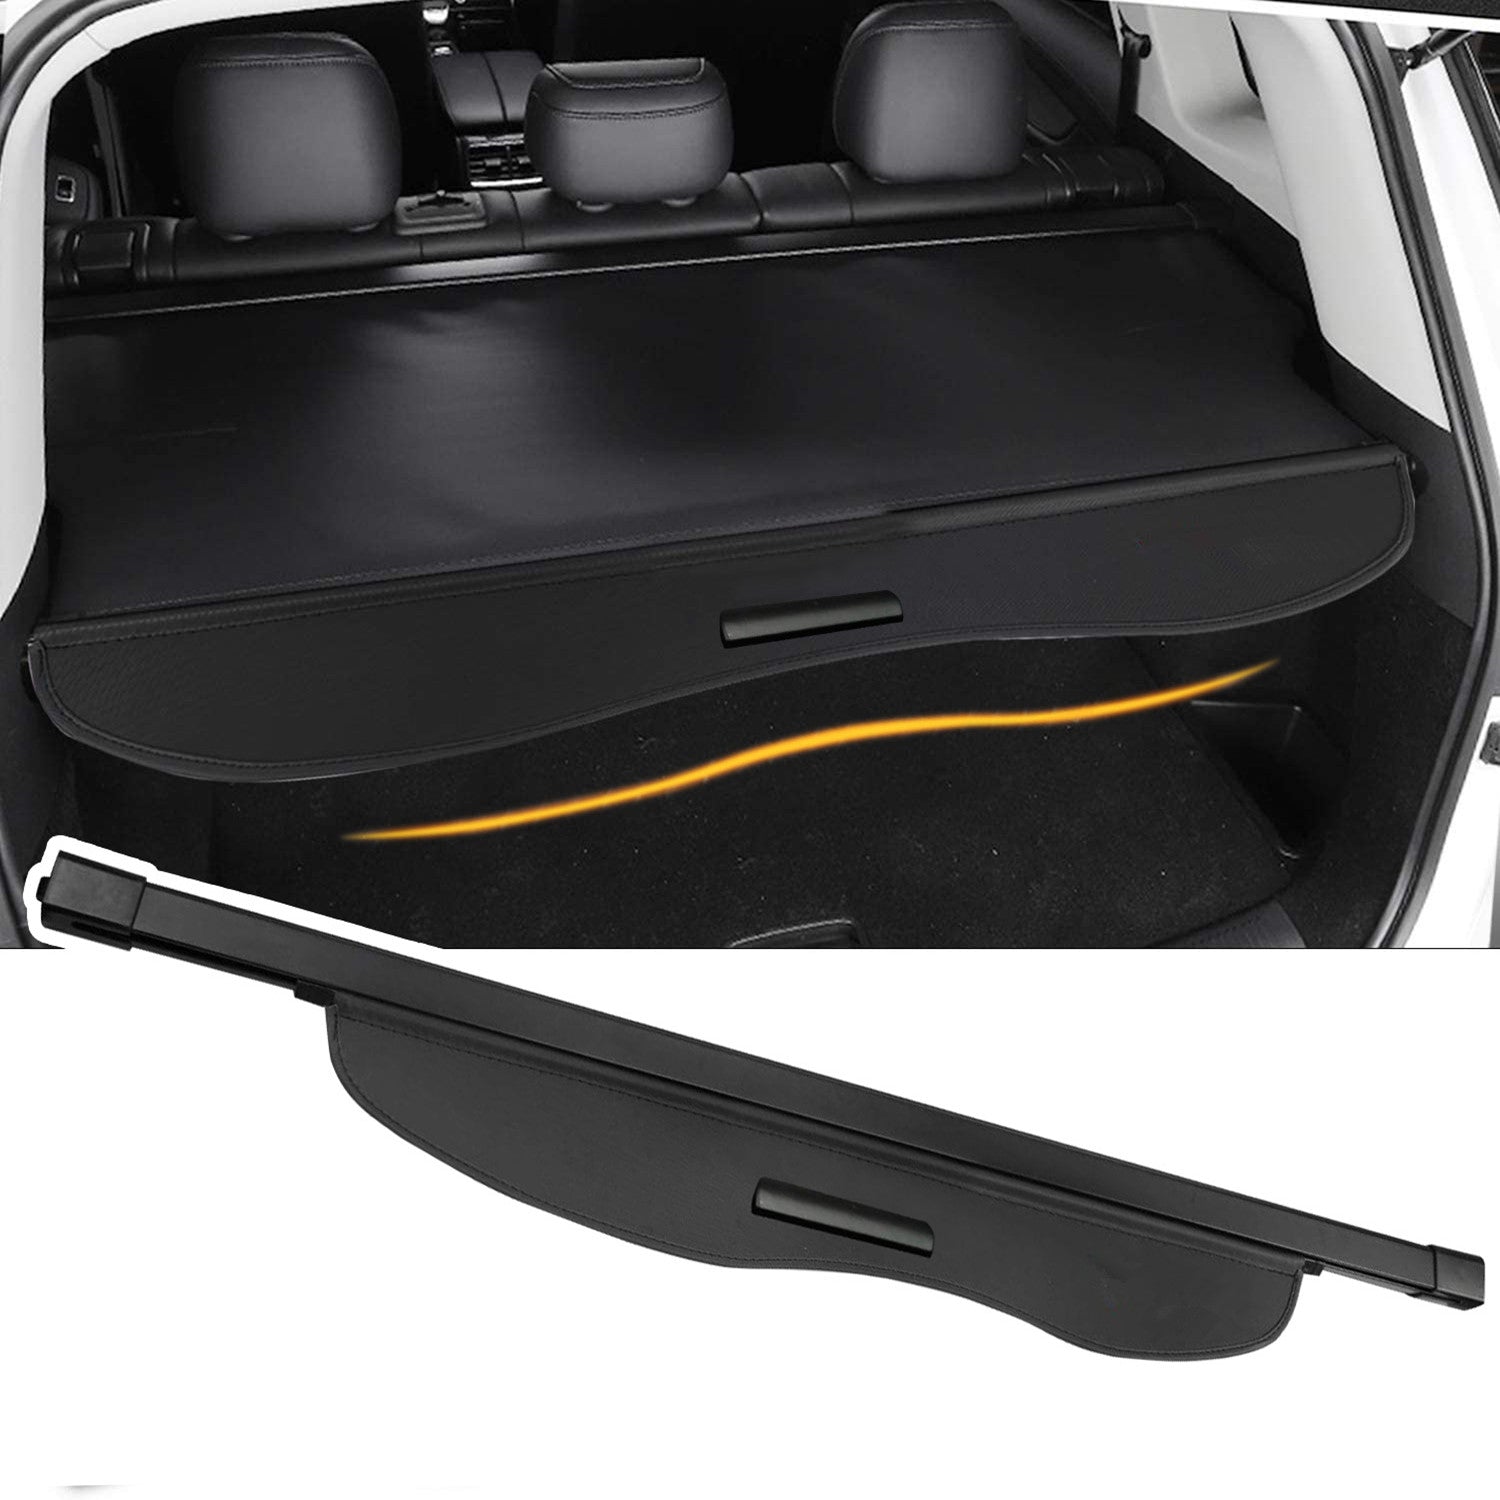 Retractable Cargo Cover For Jeep Grand Cherokee 2011-2021 Car Trunk Shade  Rear Cargo Security Shield Luggage Cover